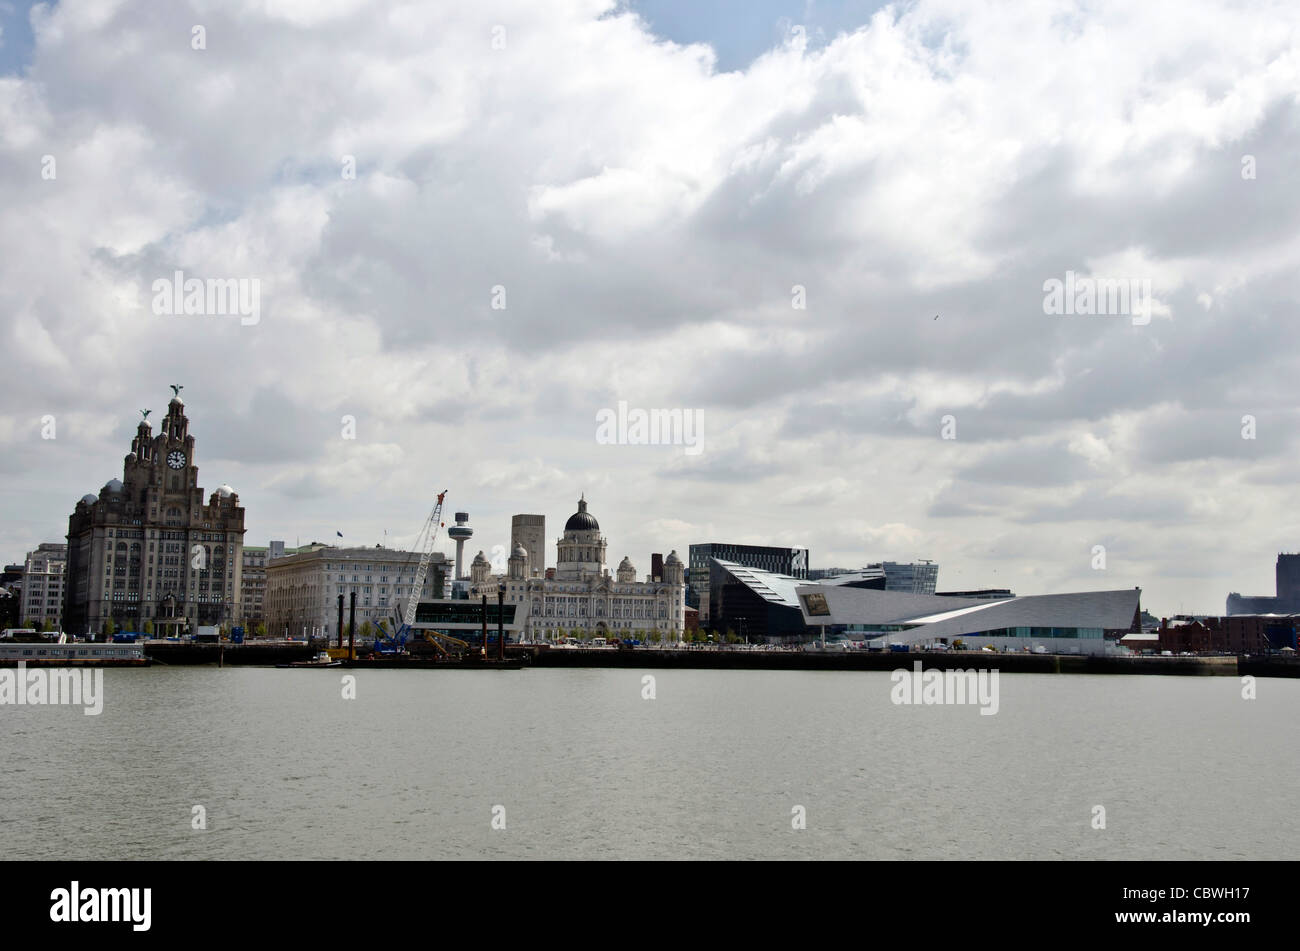 The Liverpool skyline from the 'Ferry 'Cross the Mersey', England. Stock Photo